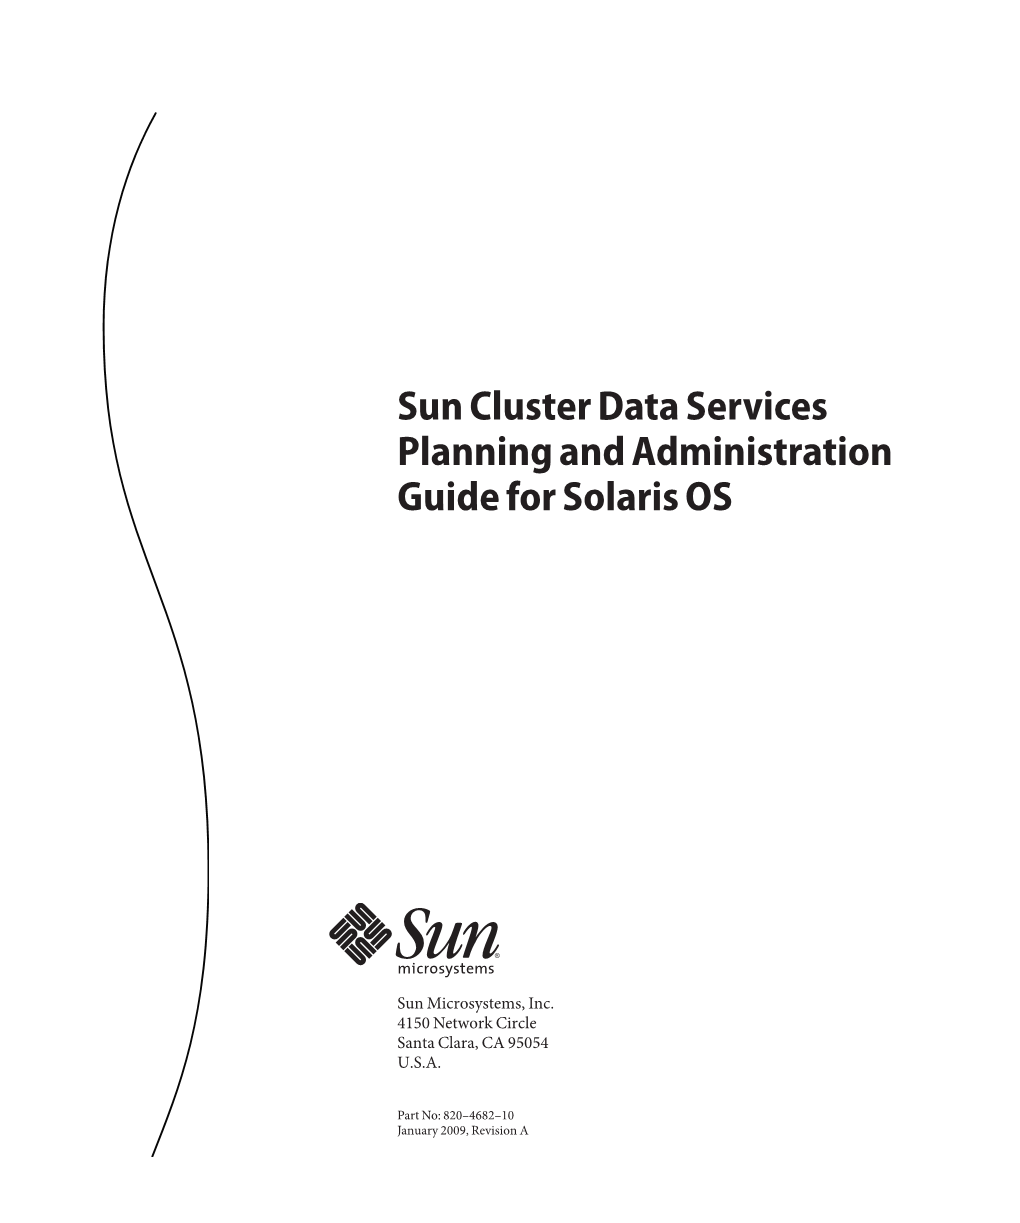 Sun Cluster Data Services Planning and Administration Guide for Solaris OS